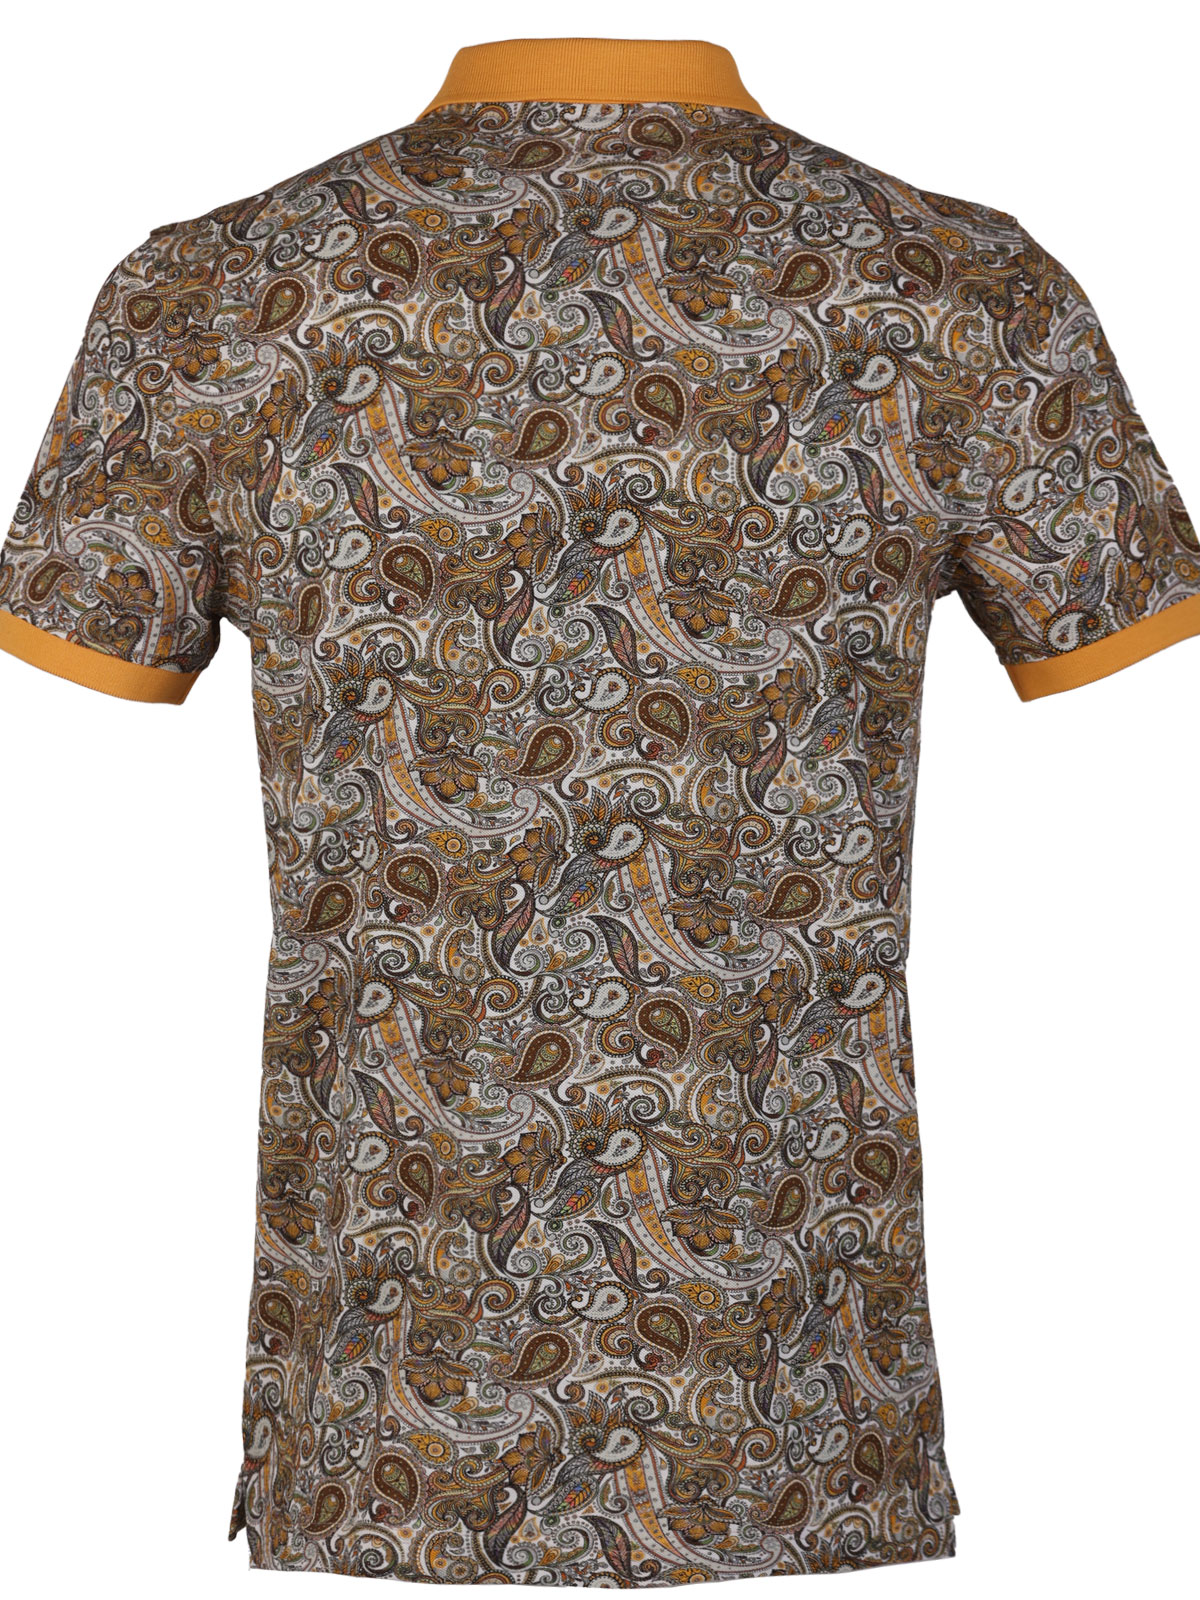 Tshirt in brown with paisley - 93446 € 42.74 img2